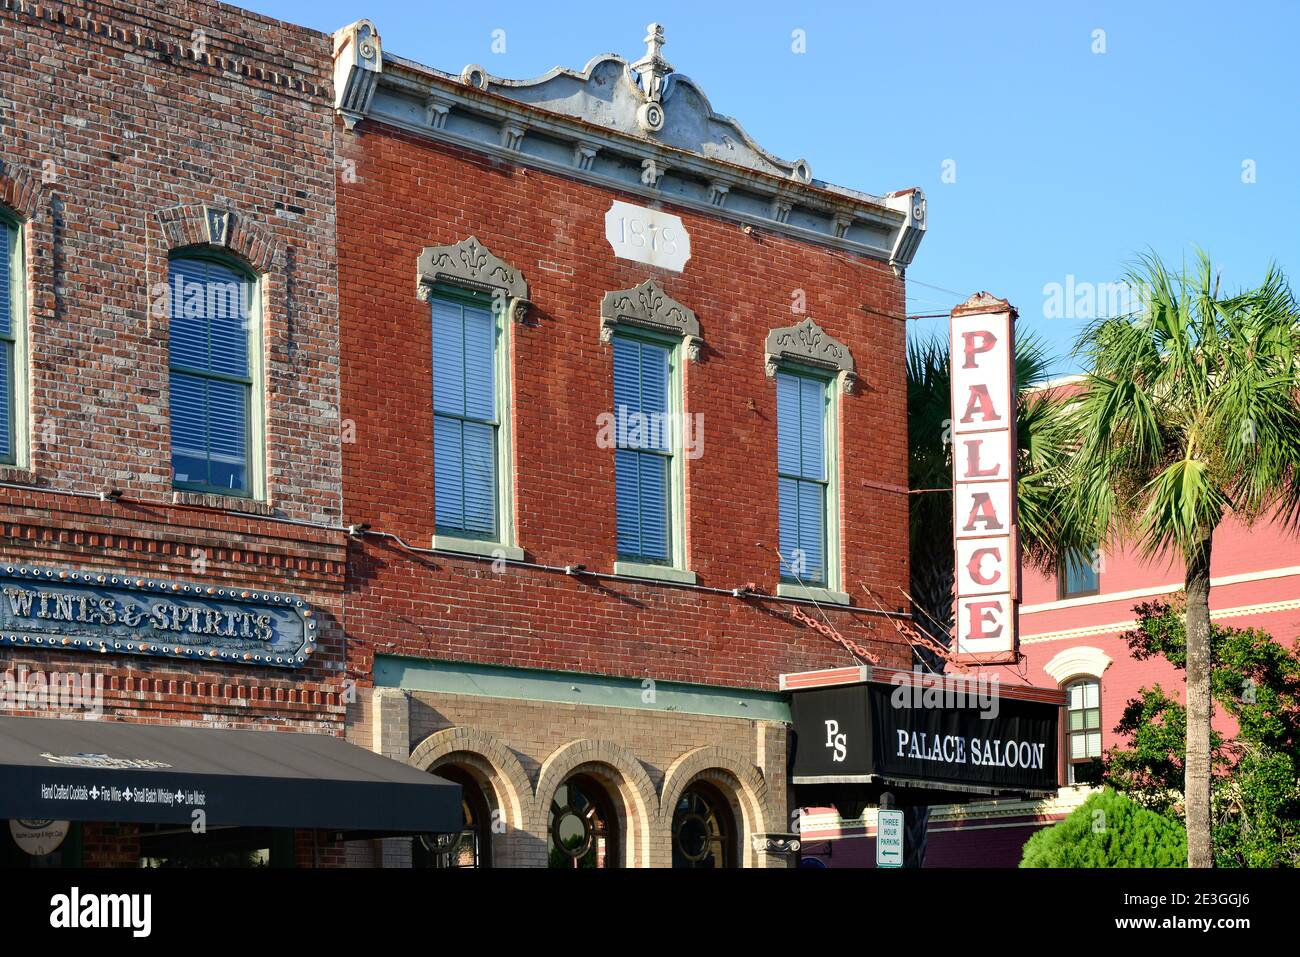 A view of historic old brick buildings from 1878, now revitilized and a popular bar, the Palace Saloon in Fernandina Beach, on Ameilia Island, FL Stock Photo